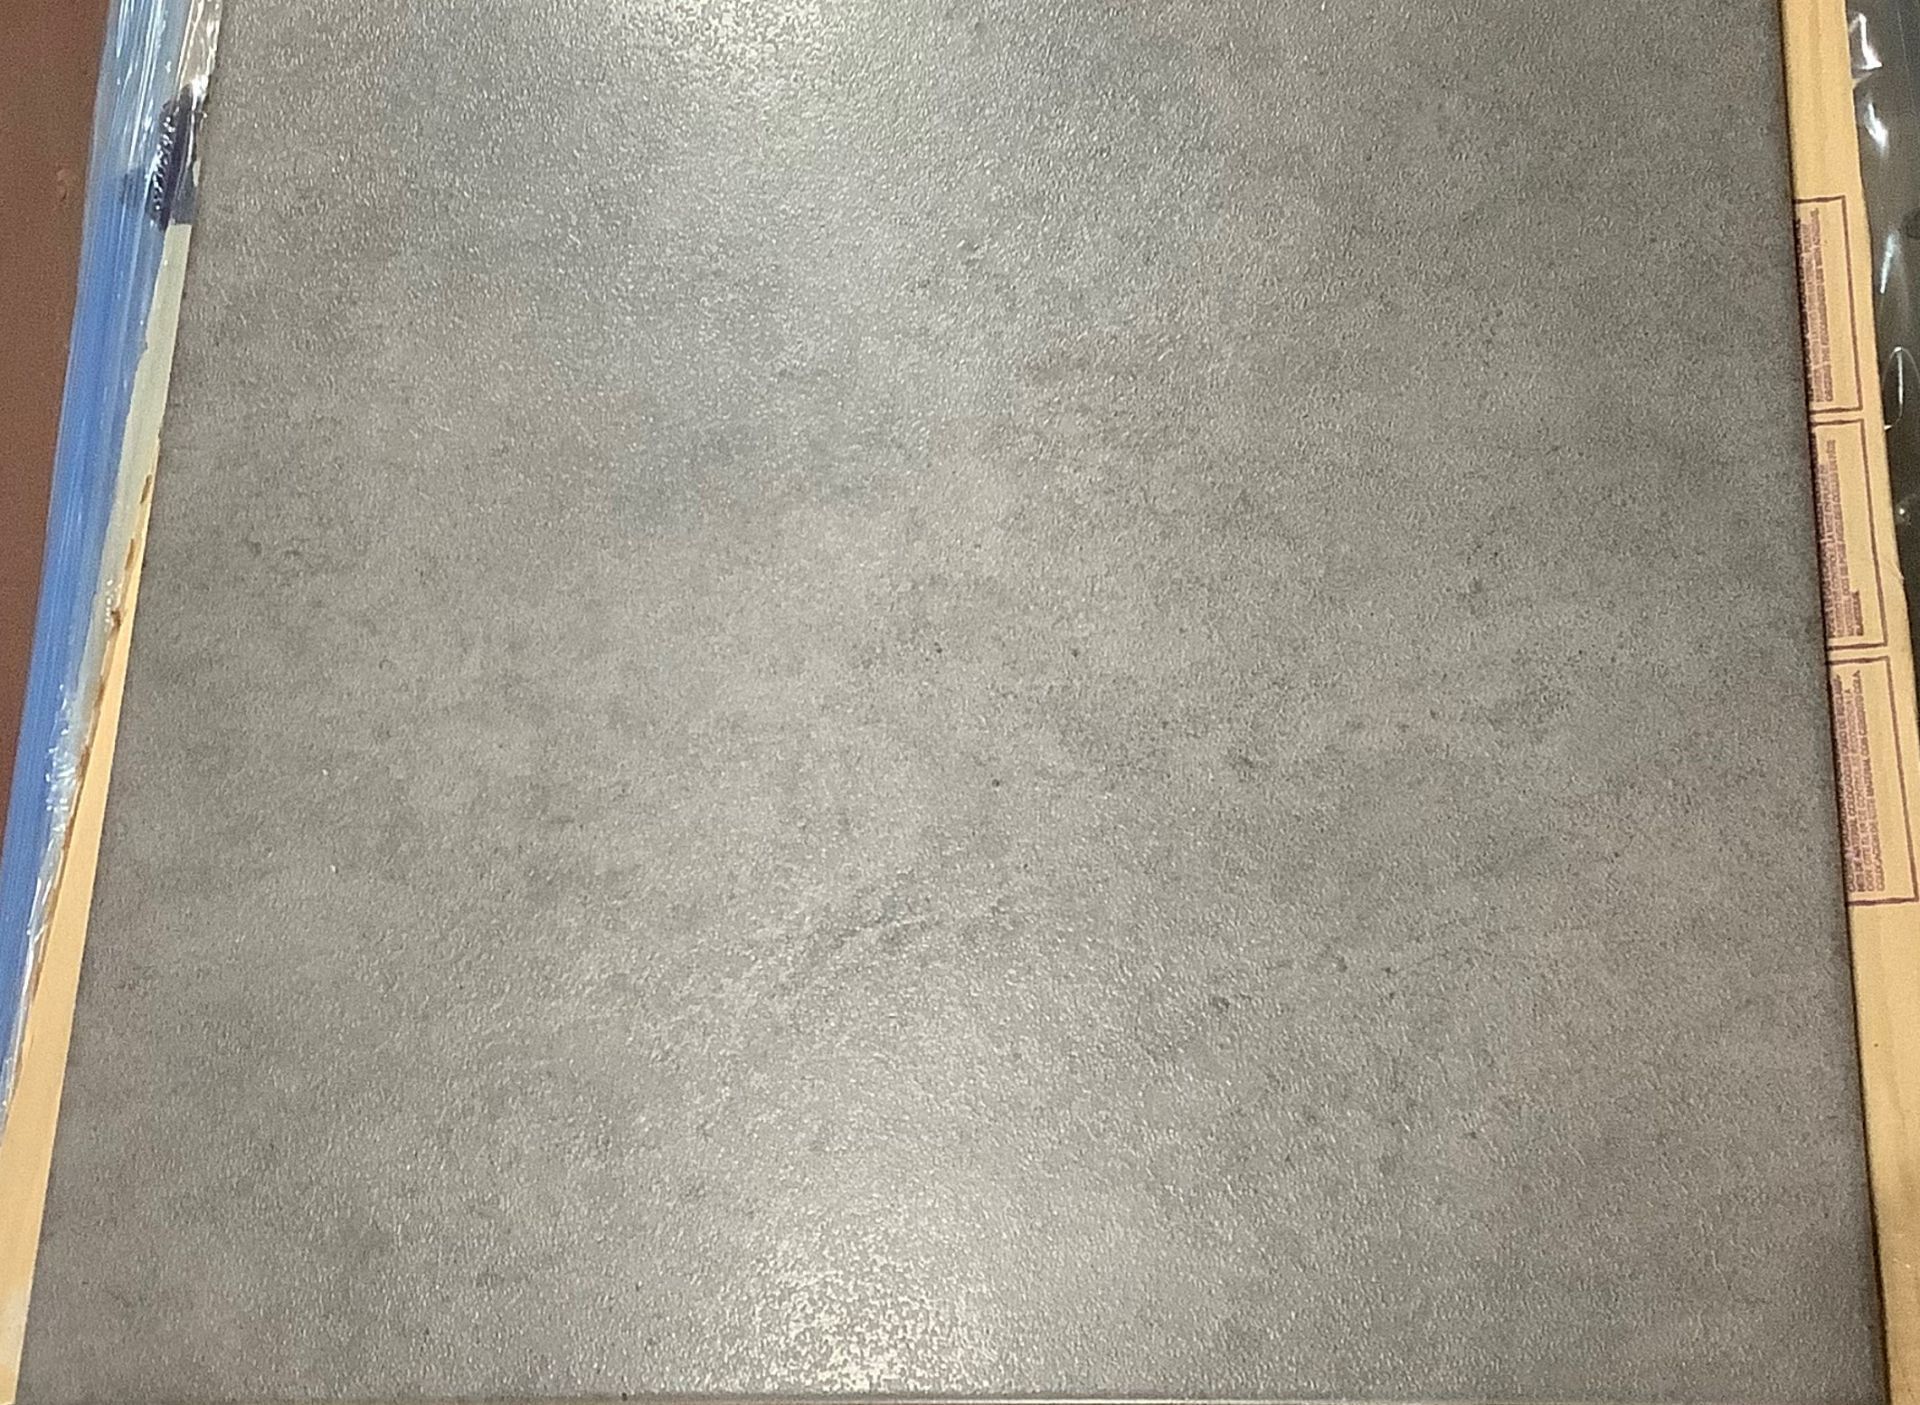 NEW 8.52 Square Meters of Porland Marengo Grey Wall and Floor Tiles. 450x450mm Per Tile, 8.8mm... - Image 2 of 3